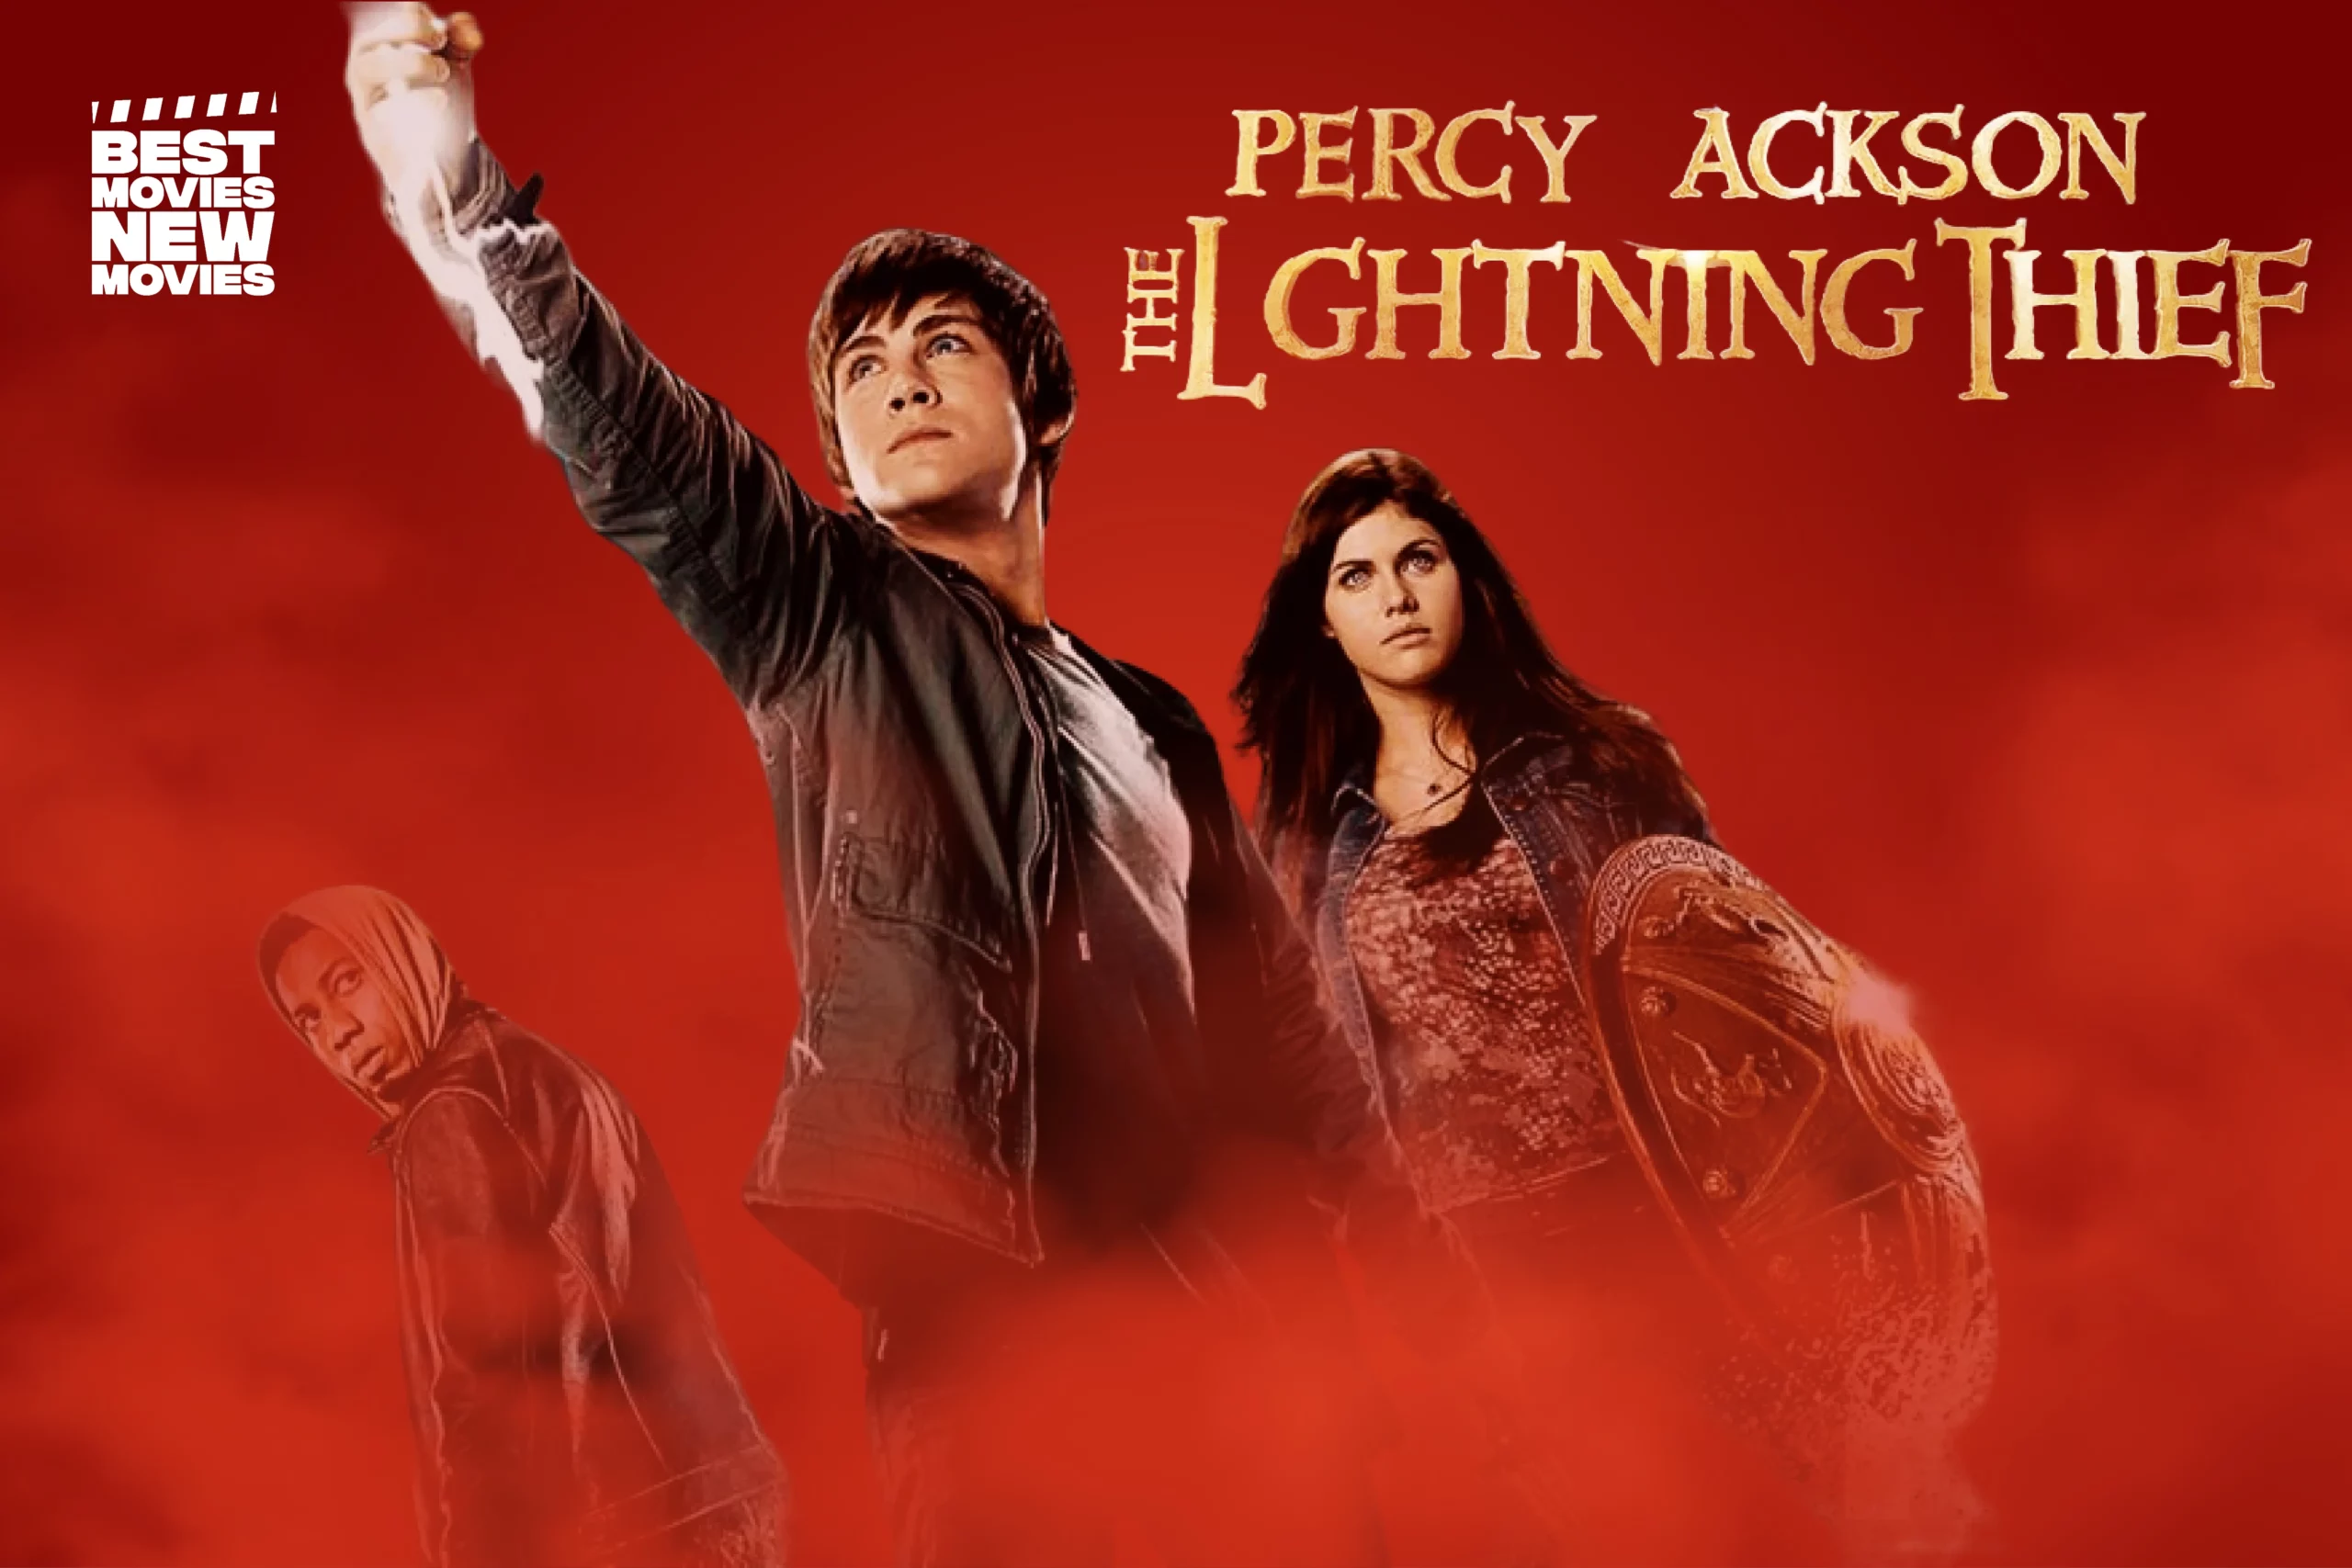 Percy Jackson and The Lighting Thief quote